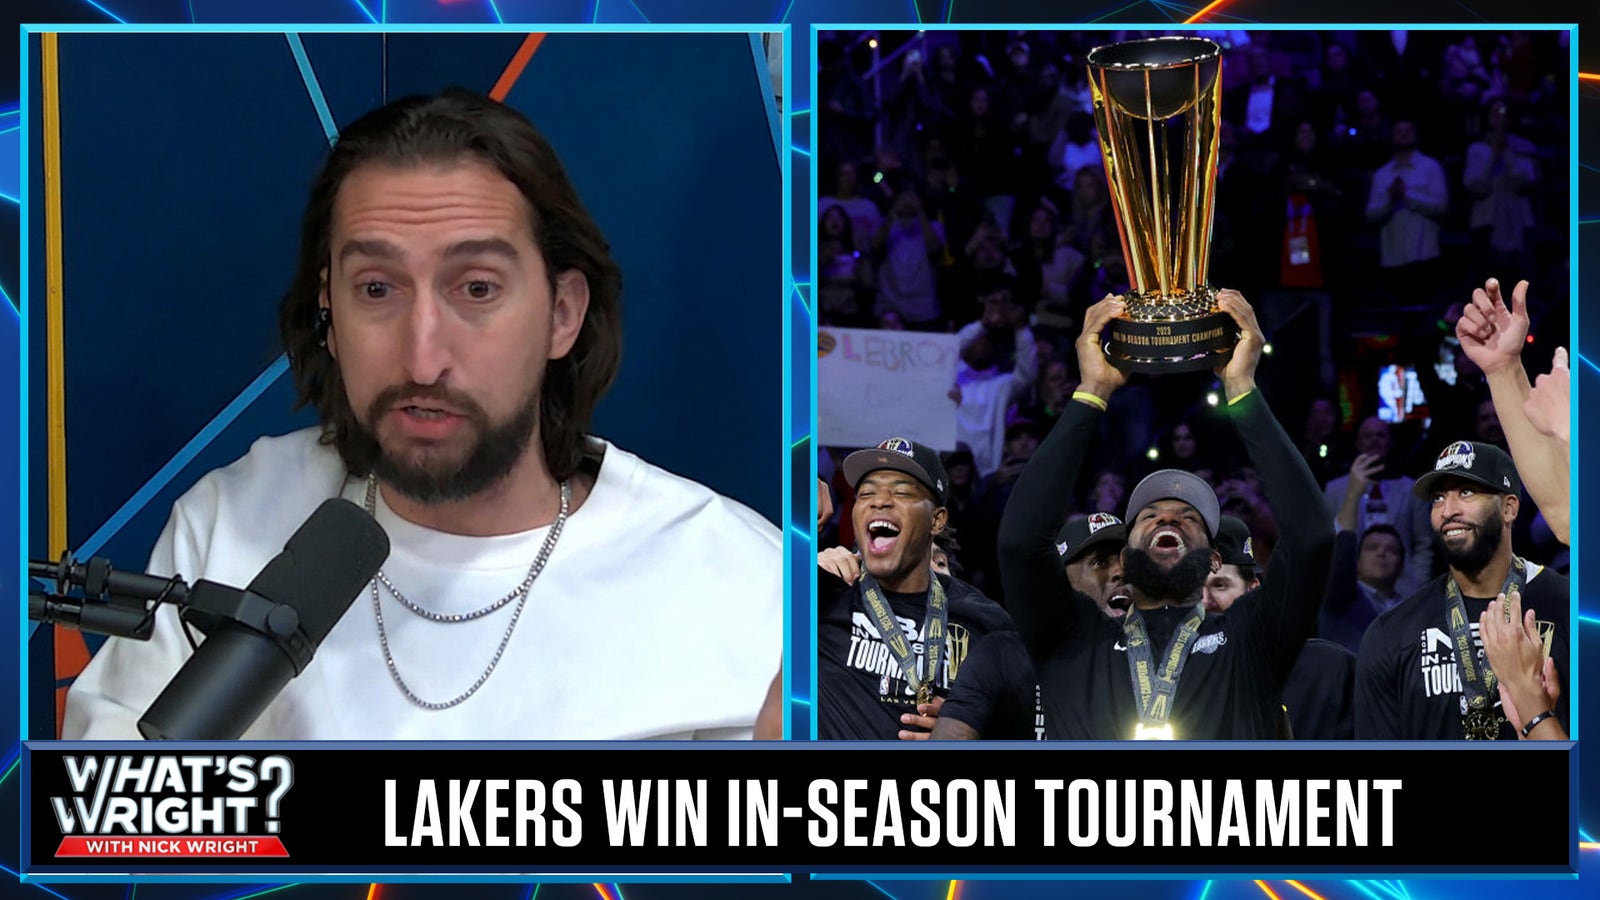 What does a Lakers In-Season Tournament title mean for LeBron?